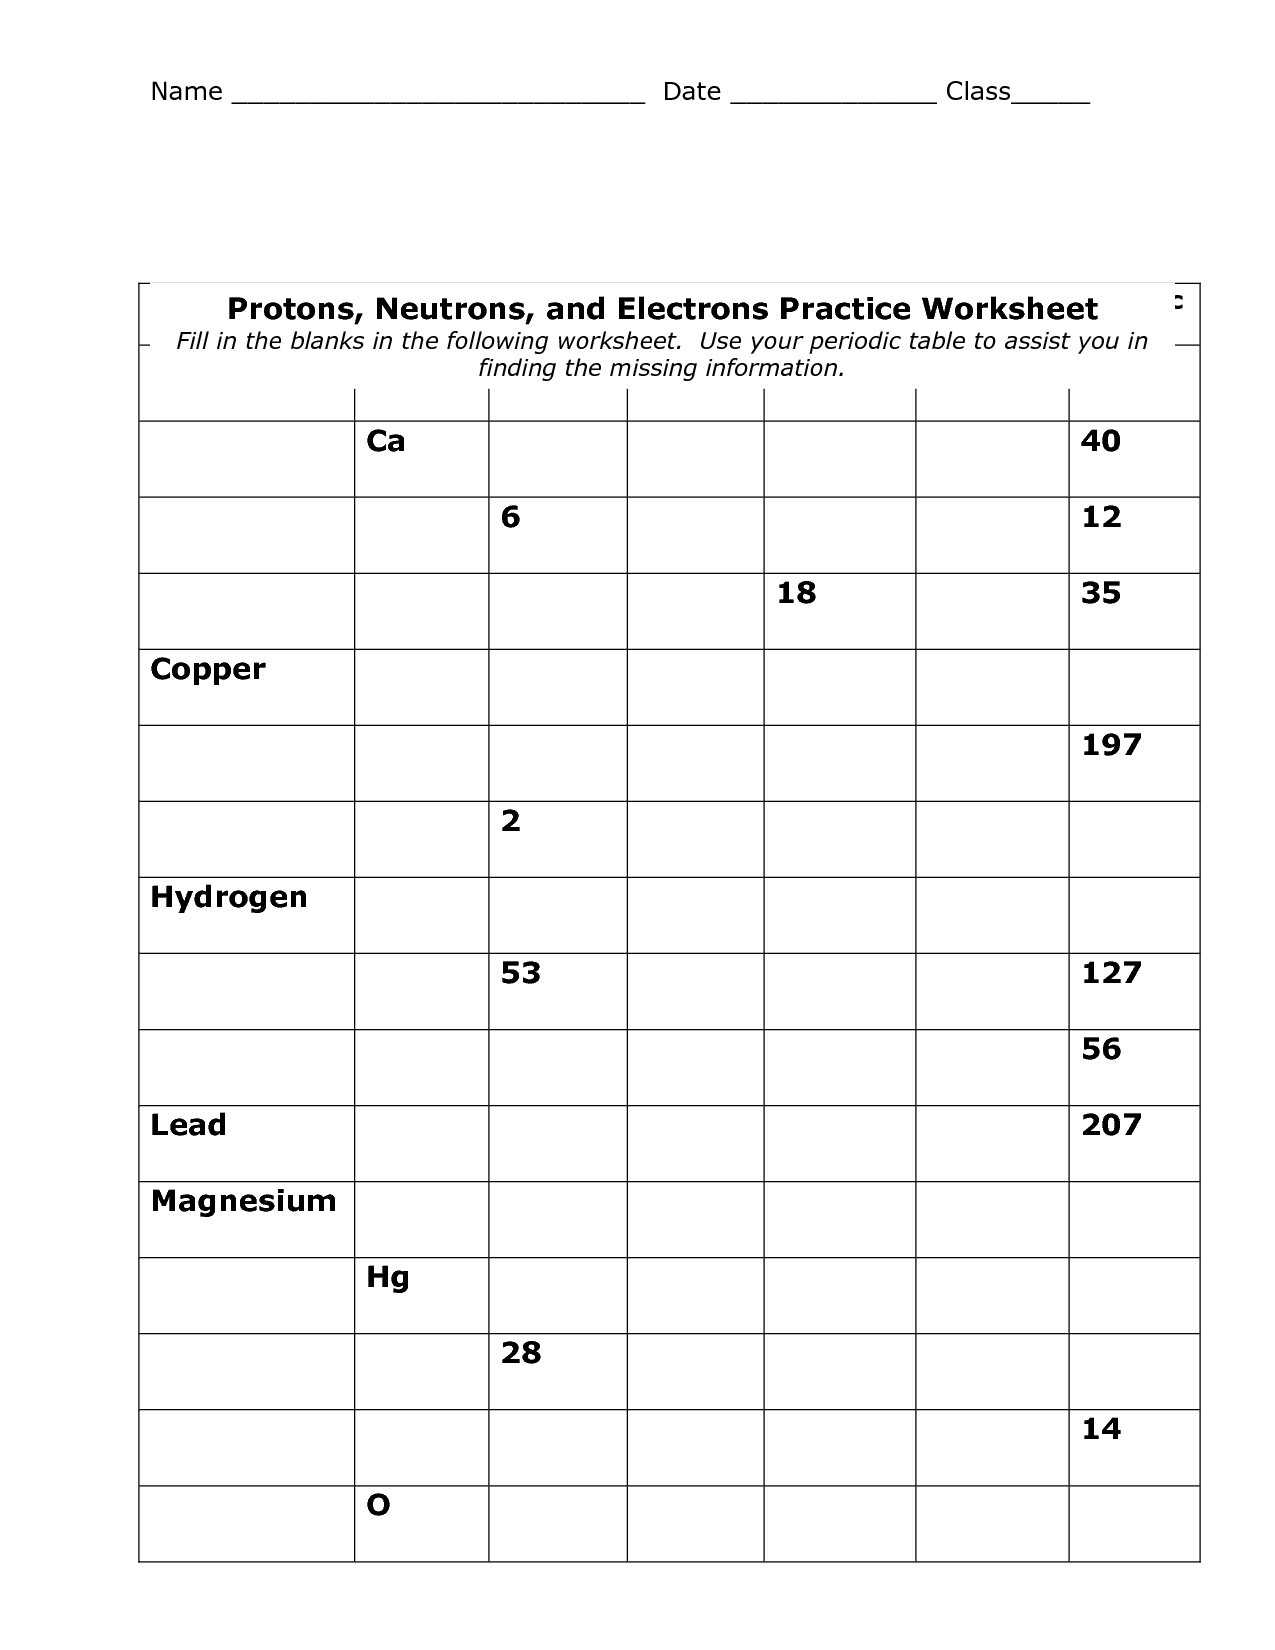 Hunting the Elements Worksheet Answers or Periodic Table Worksheets High School Fresh Answer Key to the